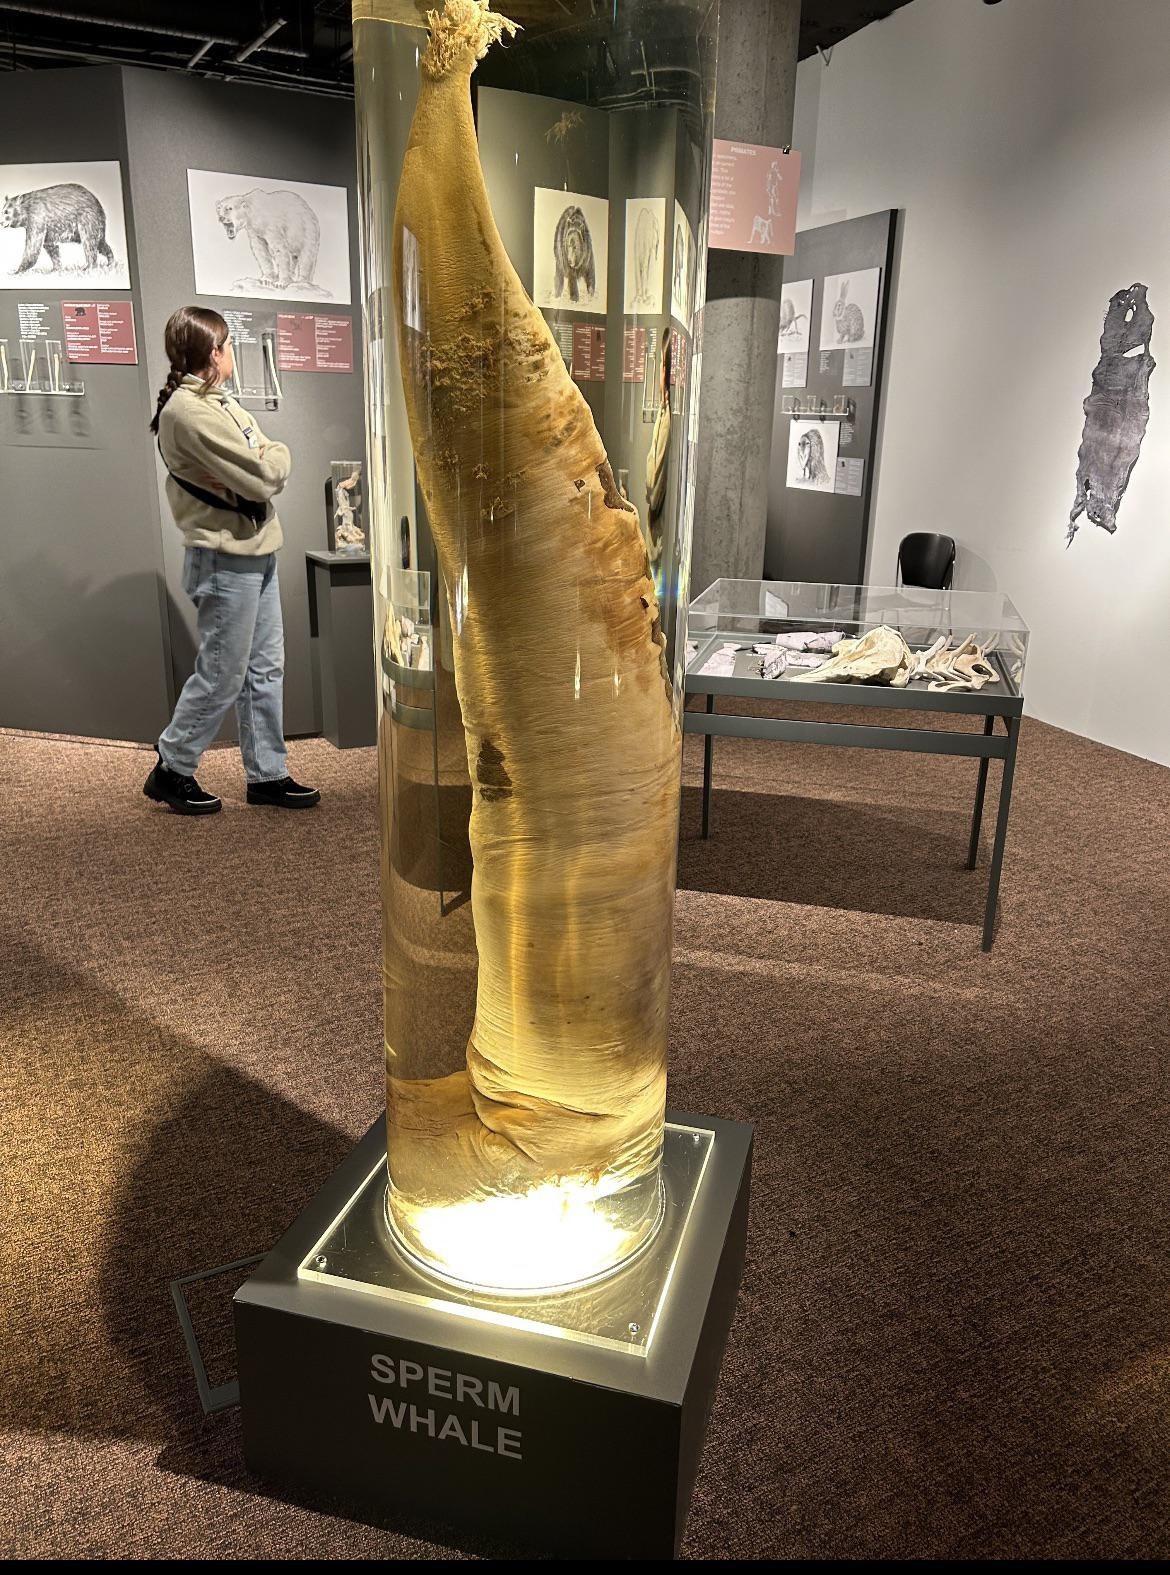 A sperm whale penis behind glass in a museum that&#x27;s taller than a woman standing nearby